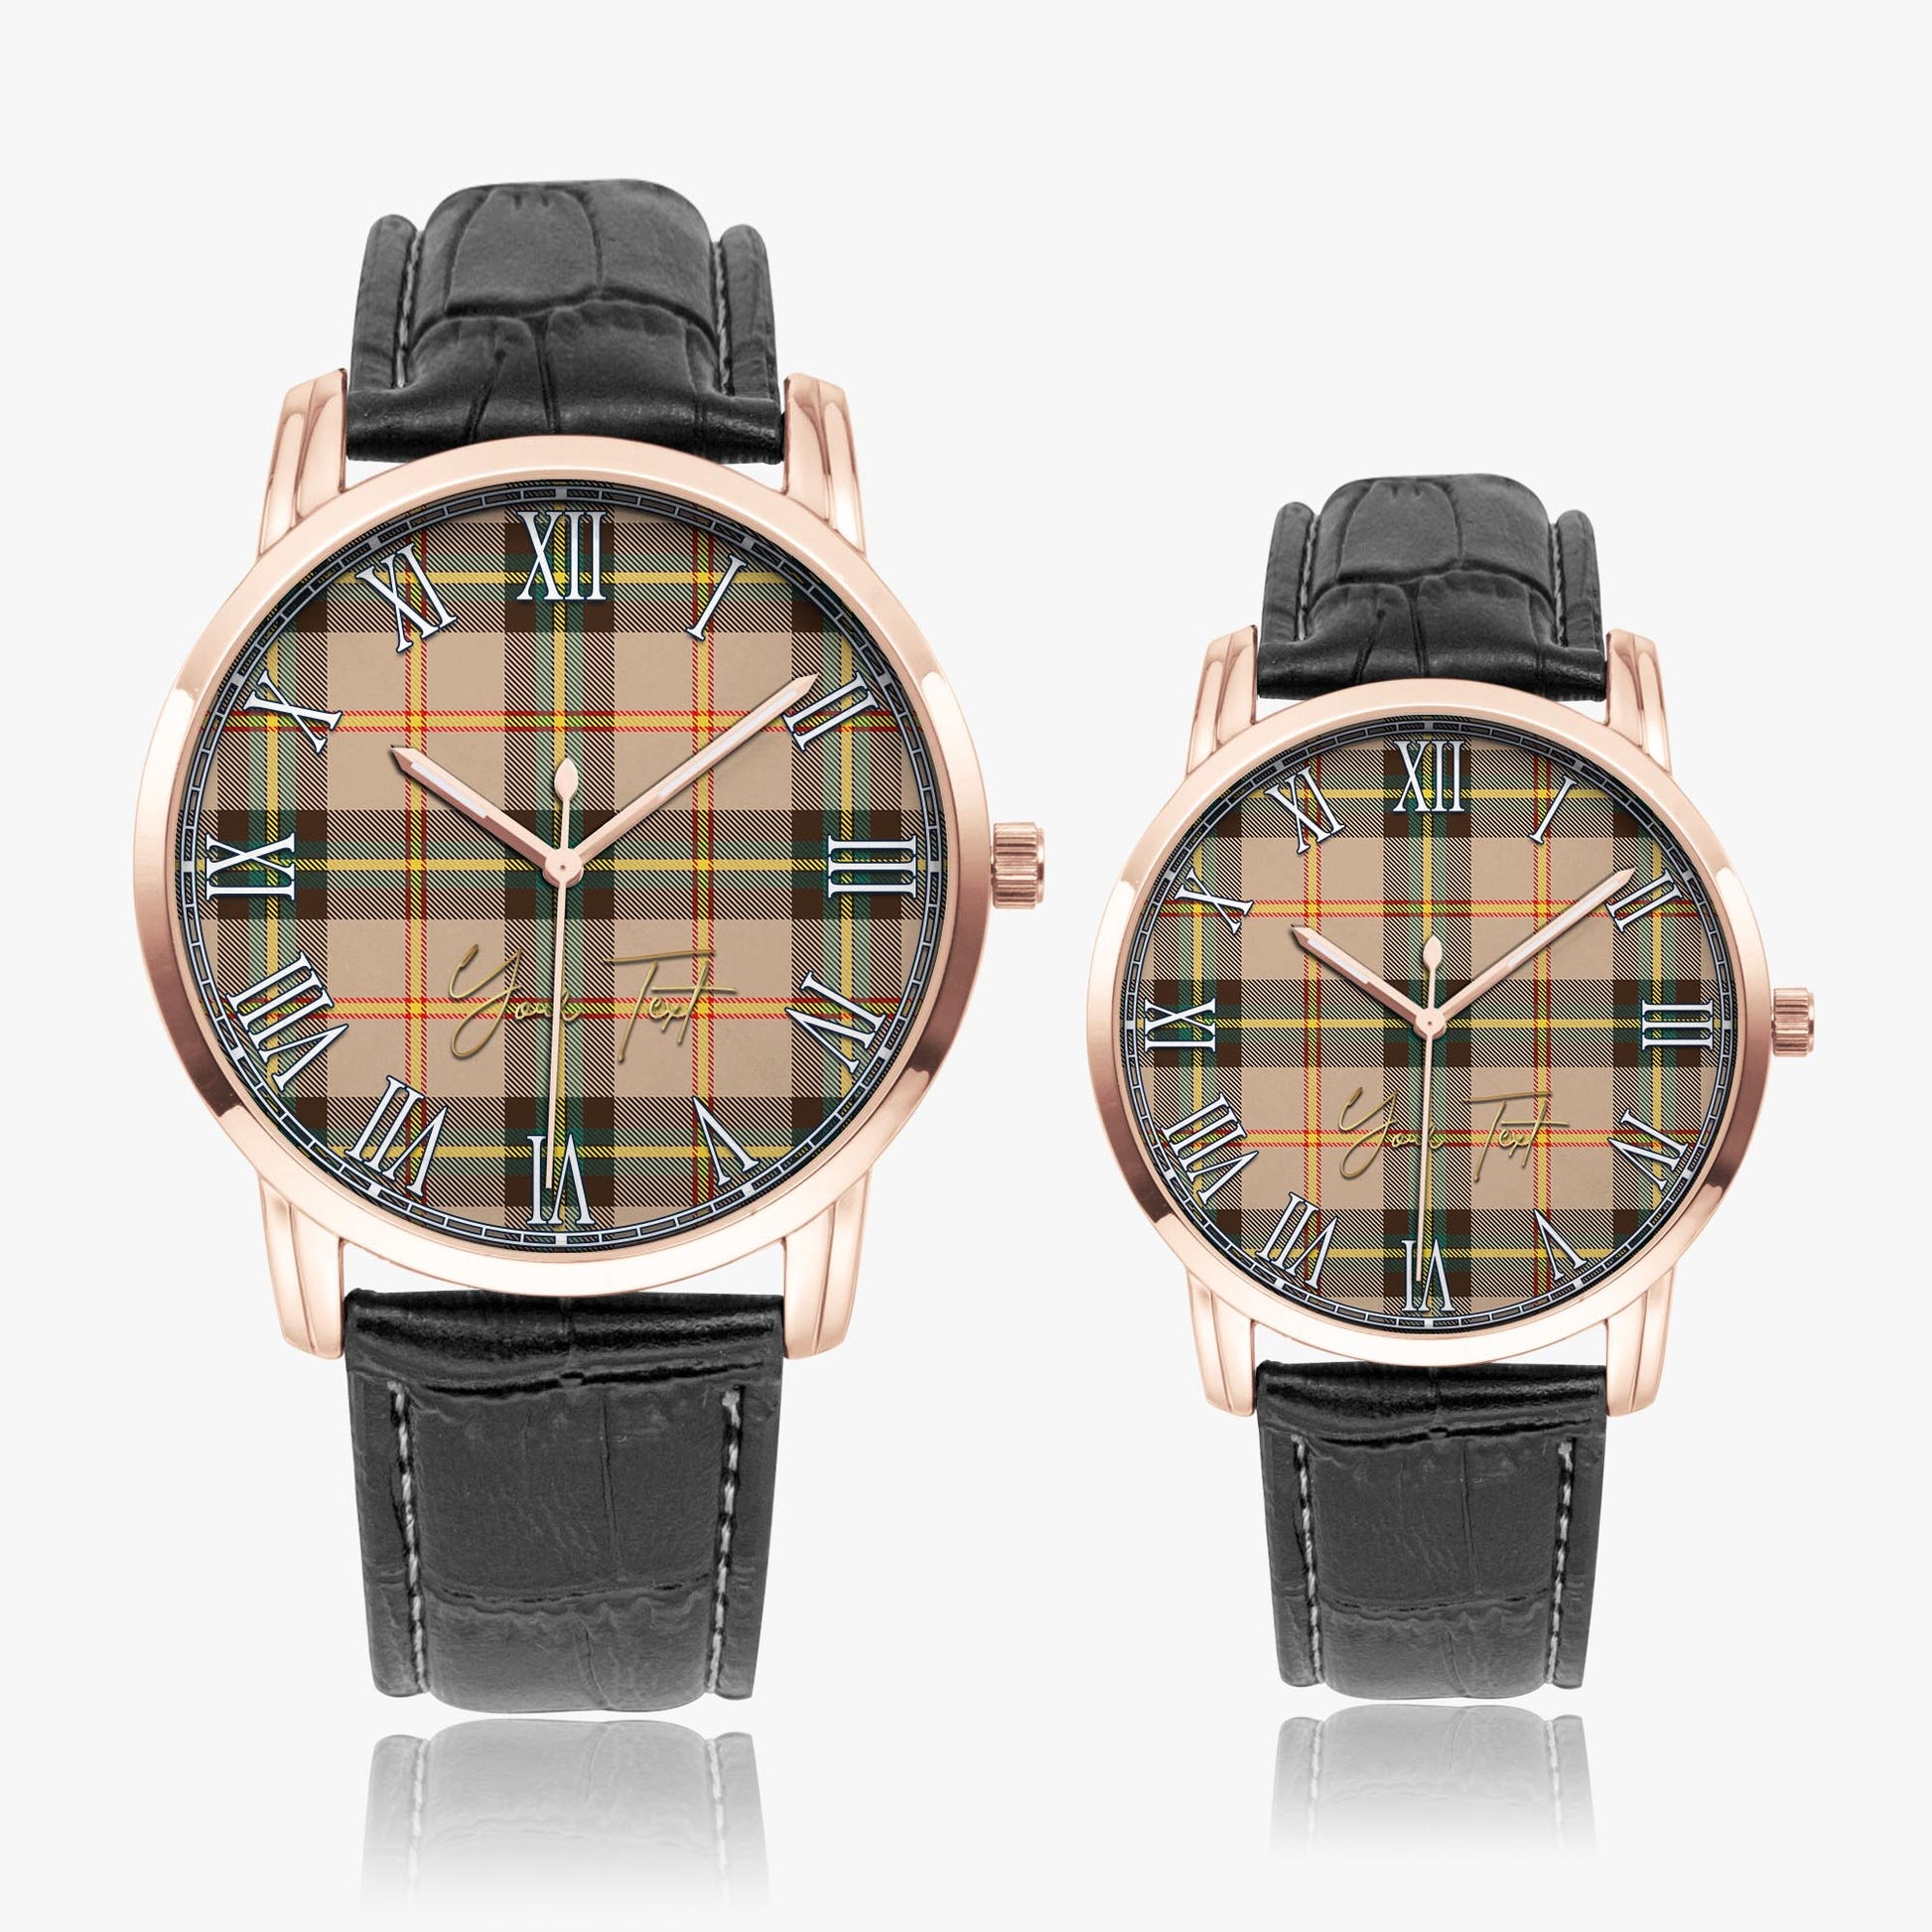 Saskatchewan Province Canada Tartan Personalized Your Text Leather Trap Quartz Watch Wide Type Rose Gold Case With Black Leather Strap - Tartanvibesclothing